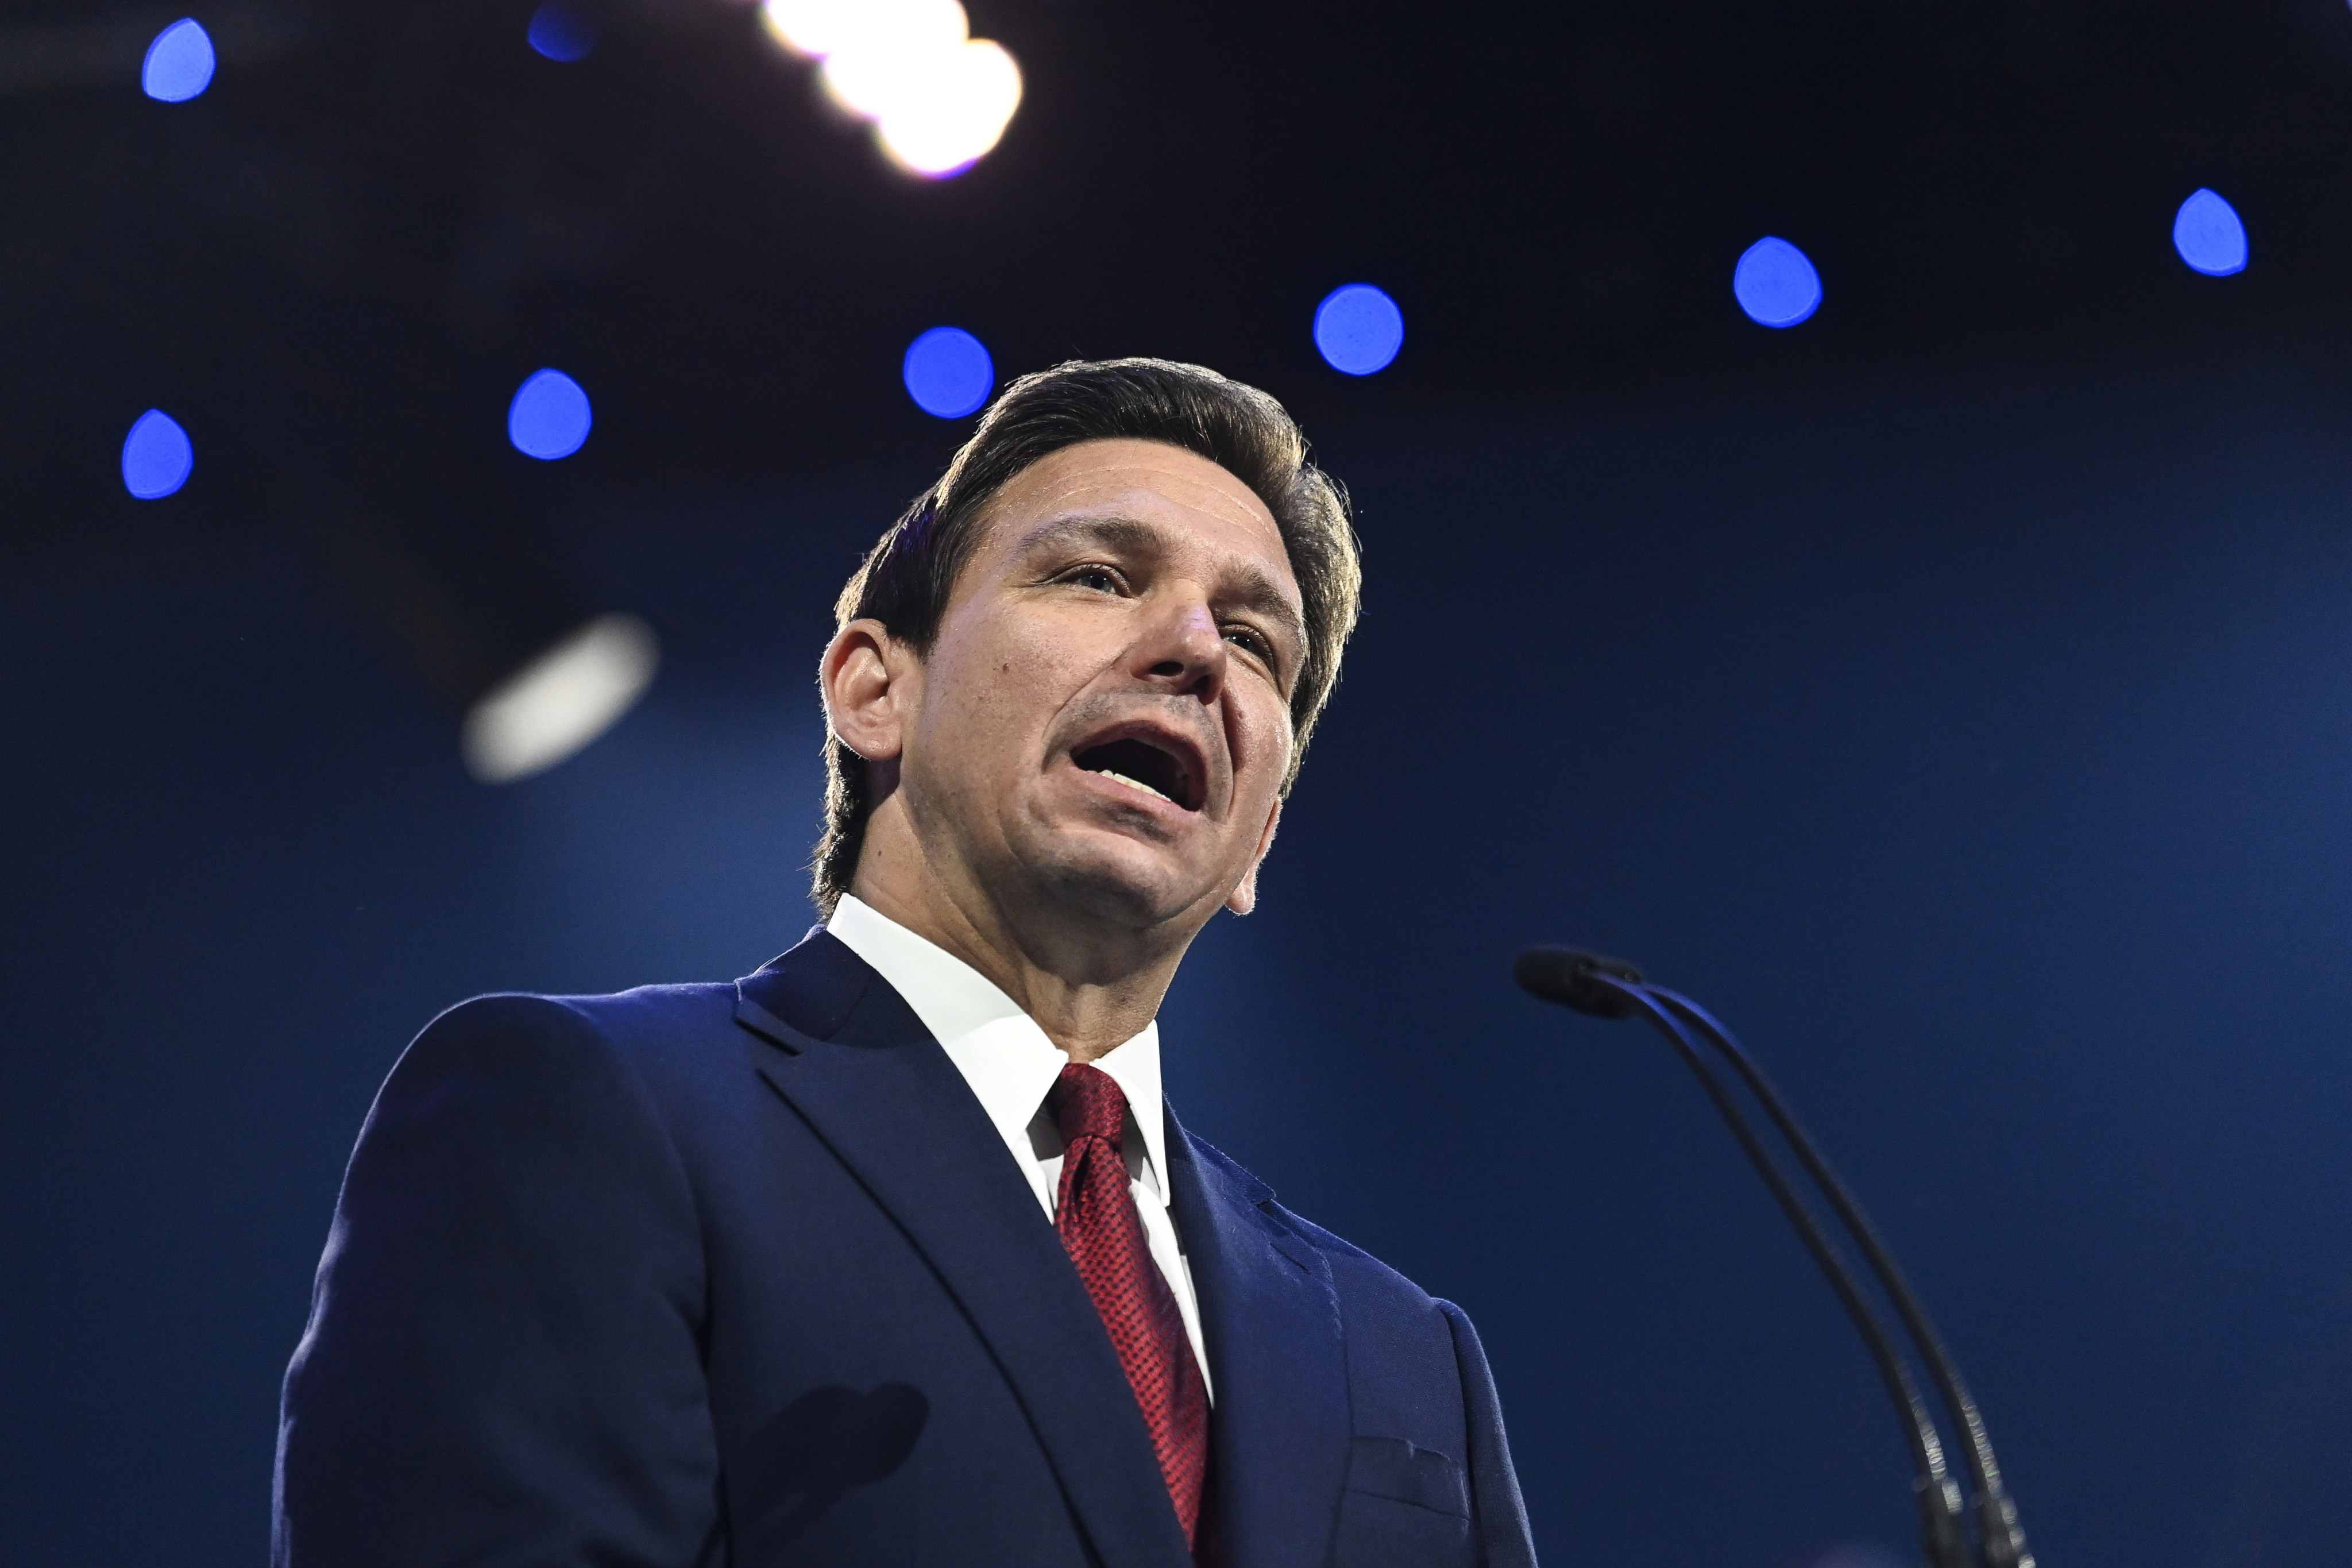 Florida Governor Ron DeSantis, a former US congressman, has trailed only Donald Trump in recent polling of likely Republican voters. Photo: AP